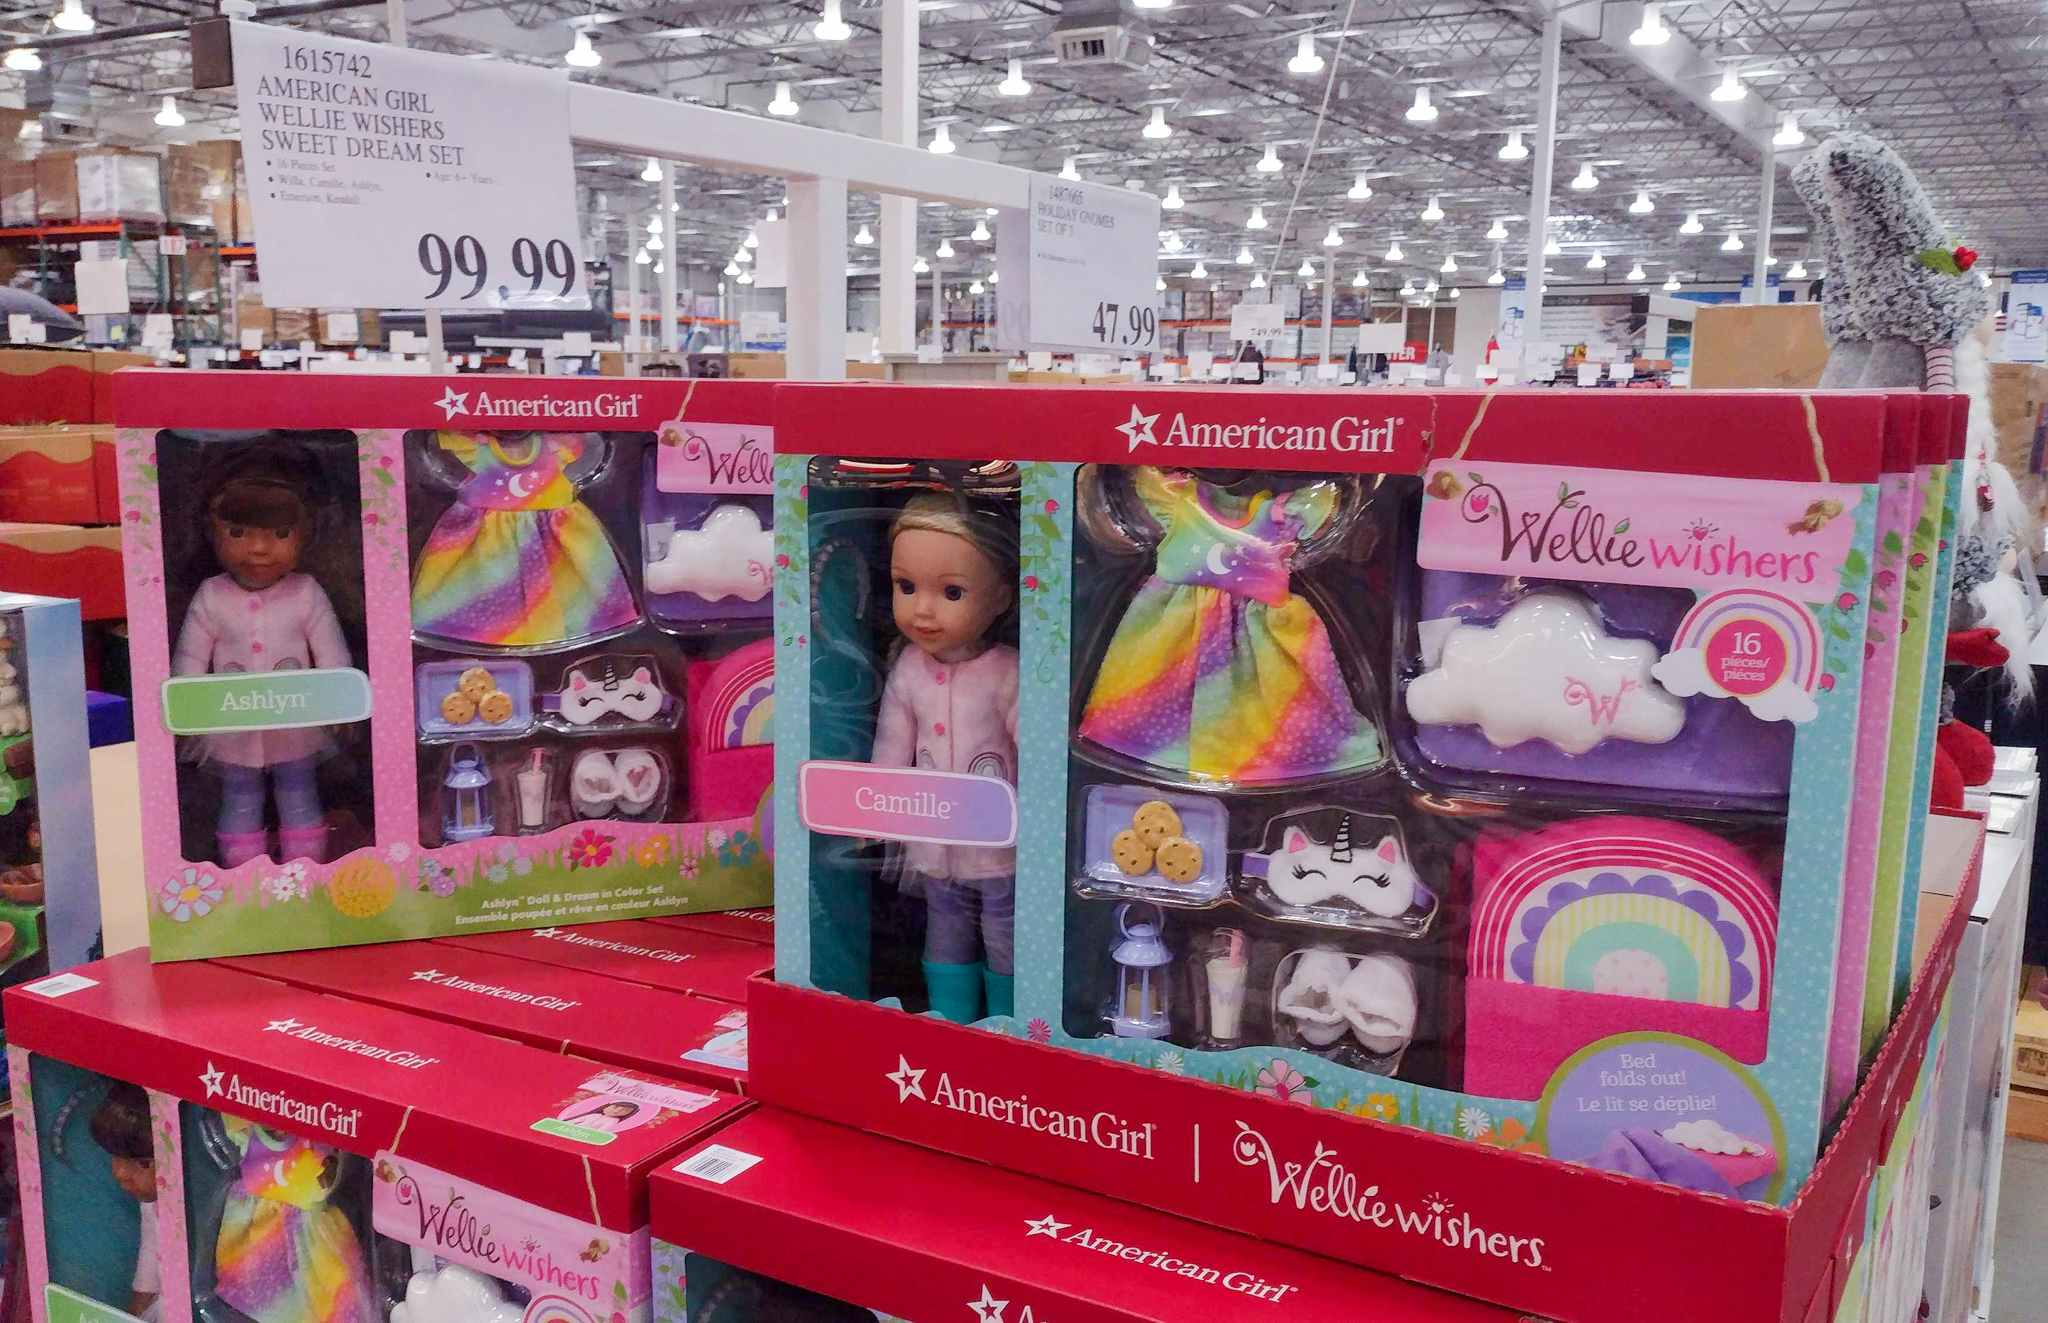 American doll welliewishers doll set with sale sign at costco